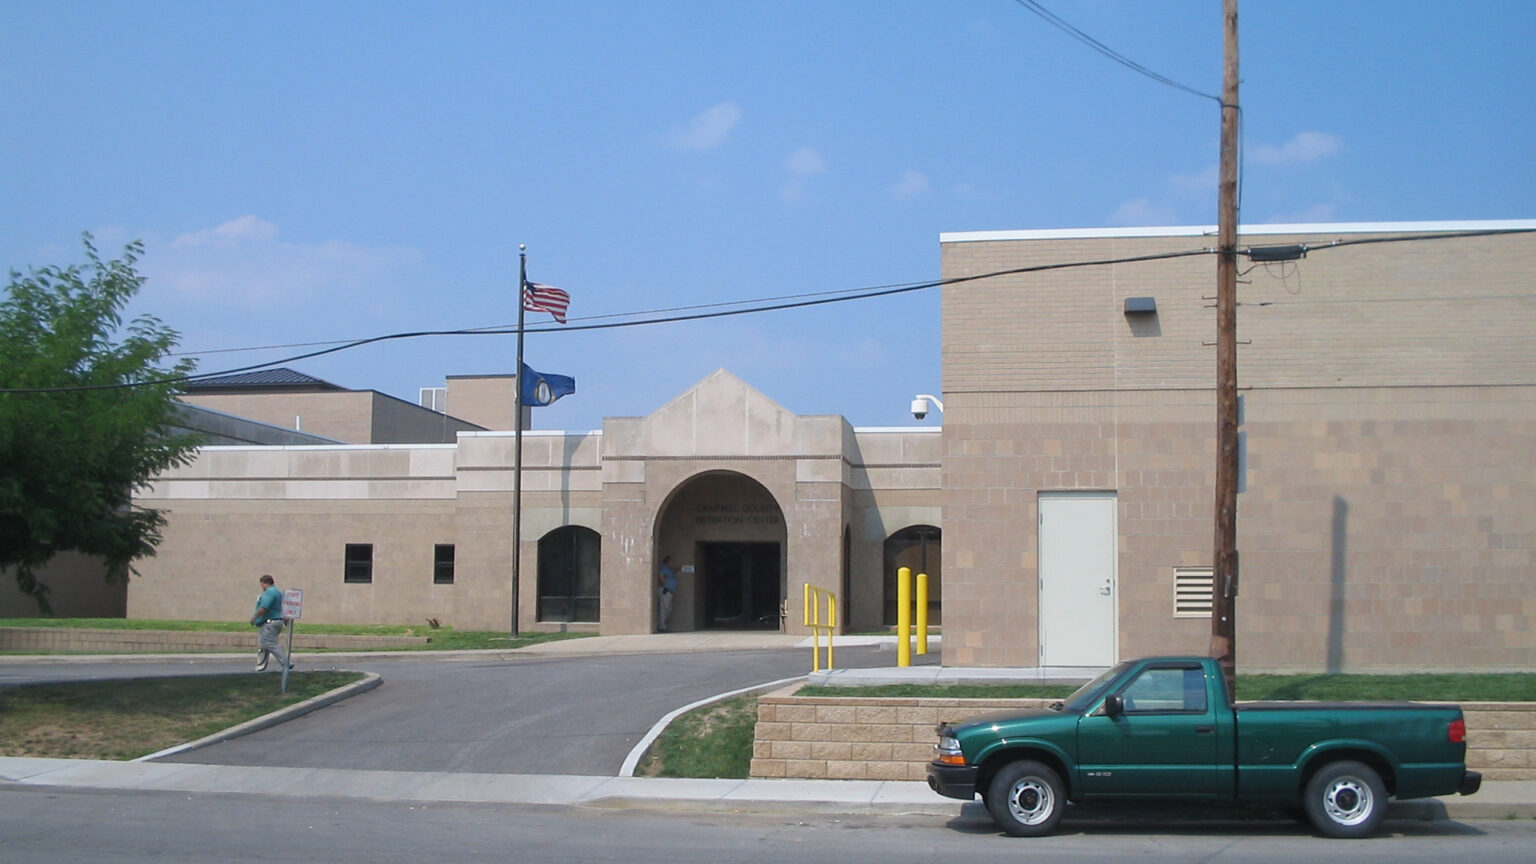 Campbell Co Correctional System, Newport KY - 1